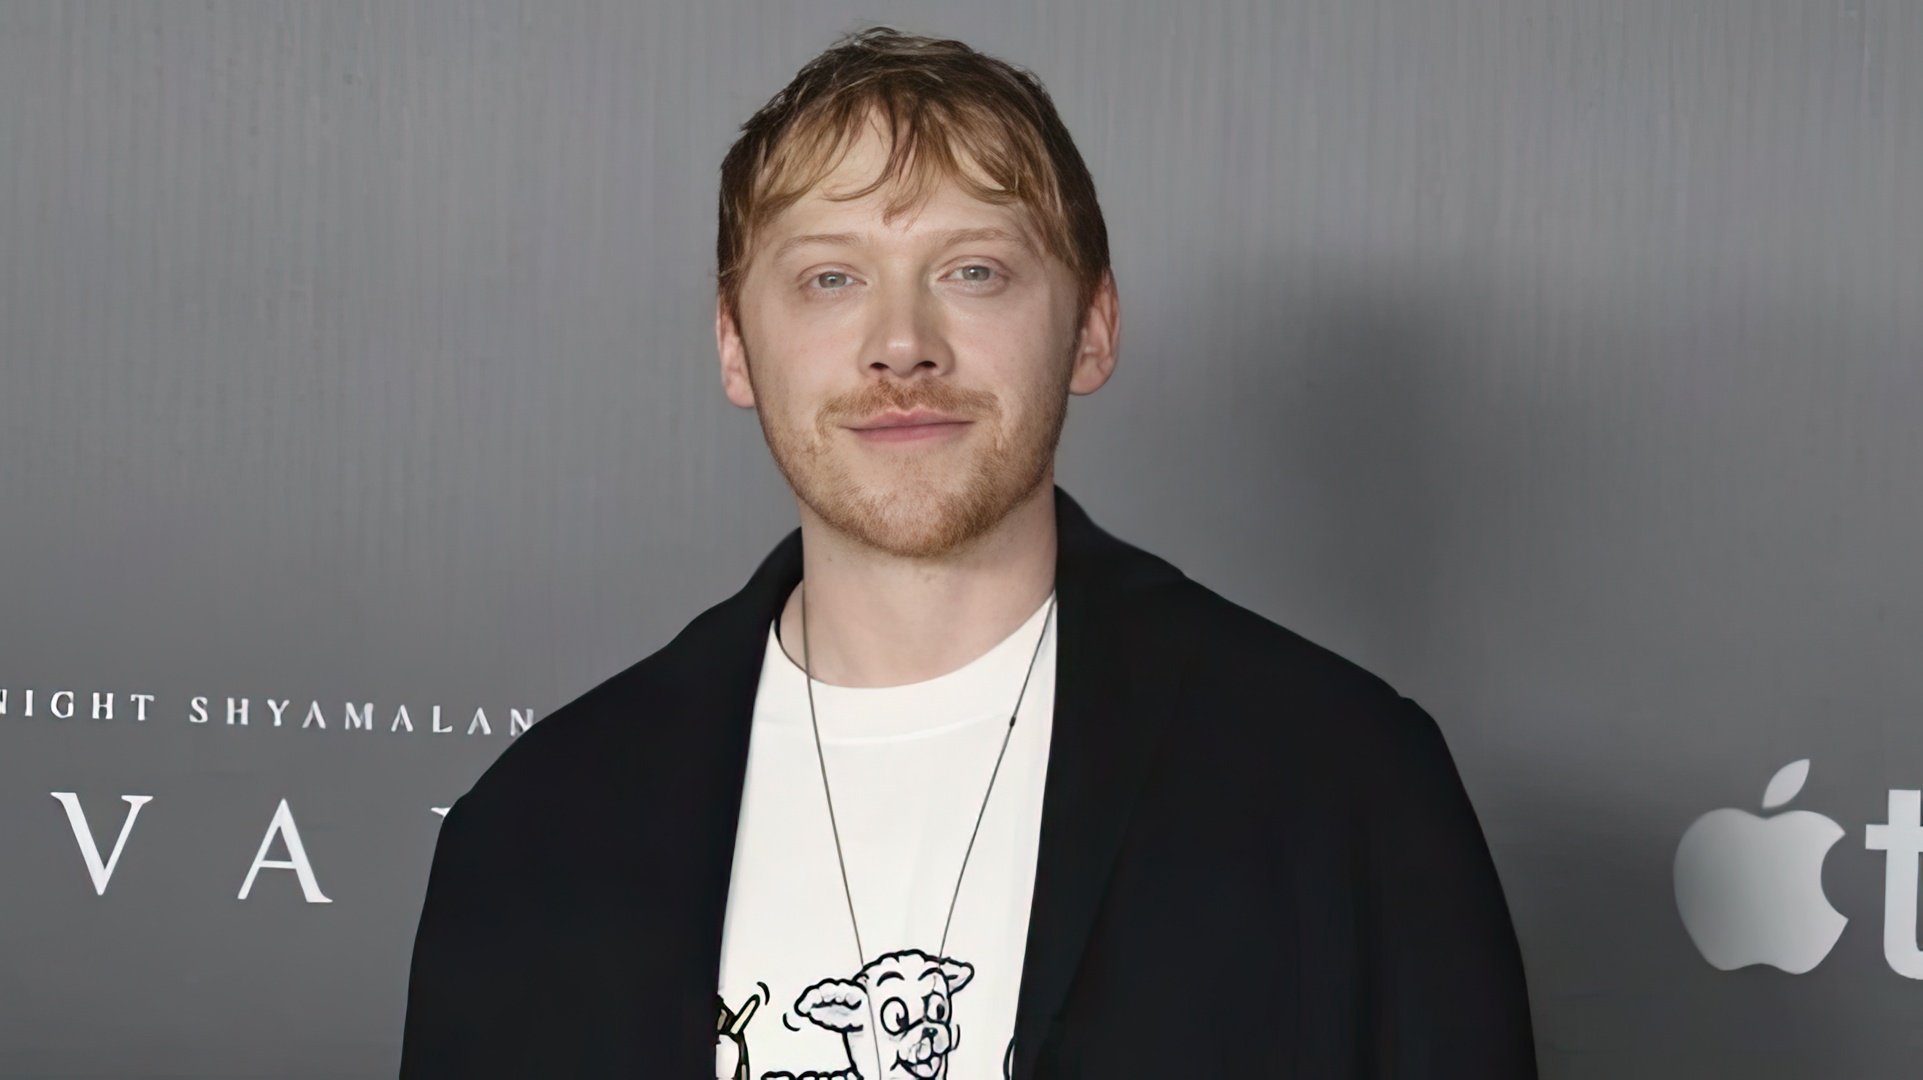 Rupert Grint decided to end his acting career